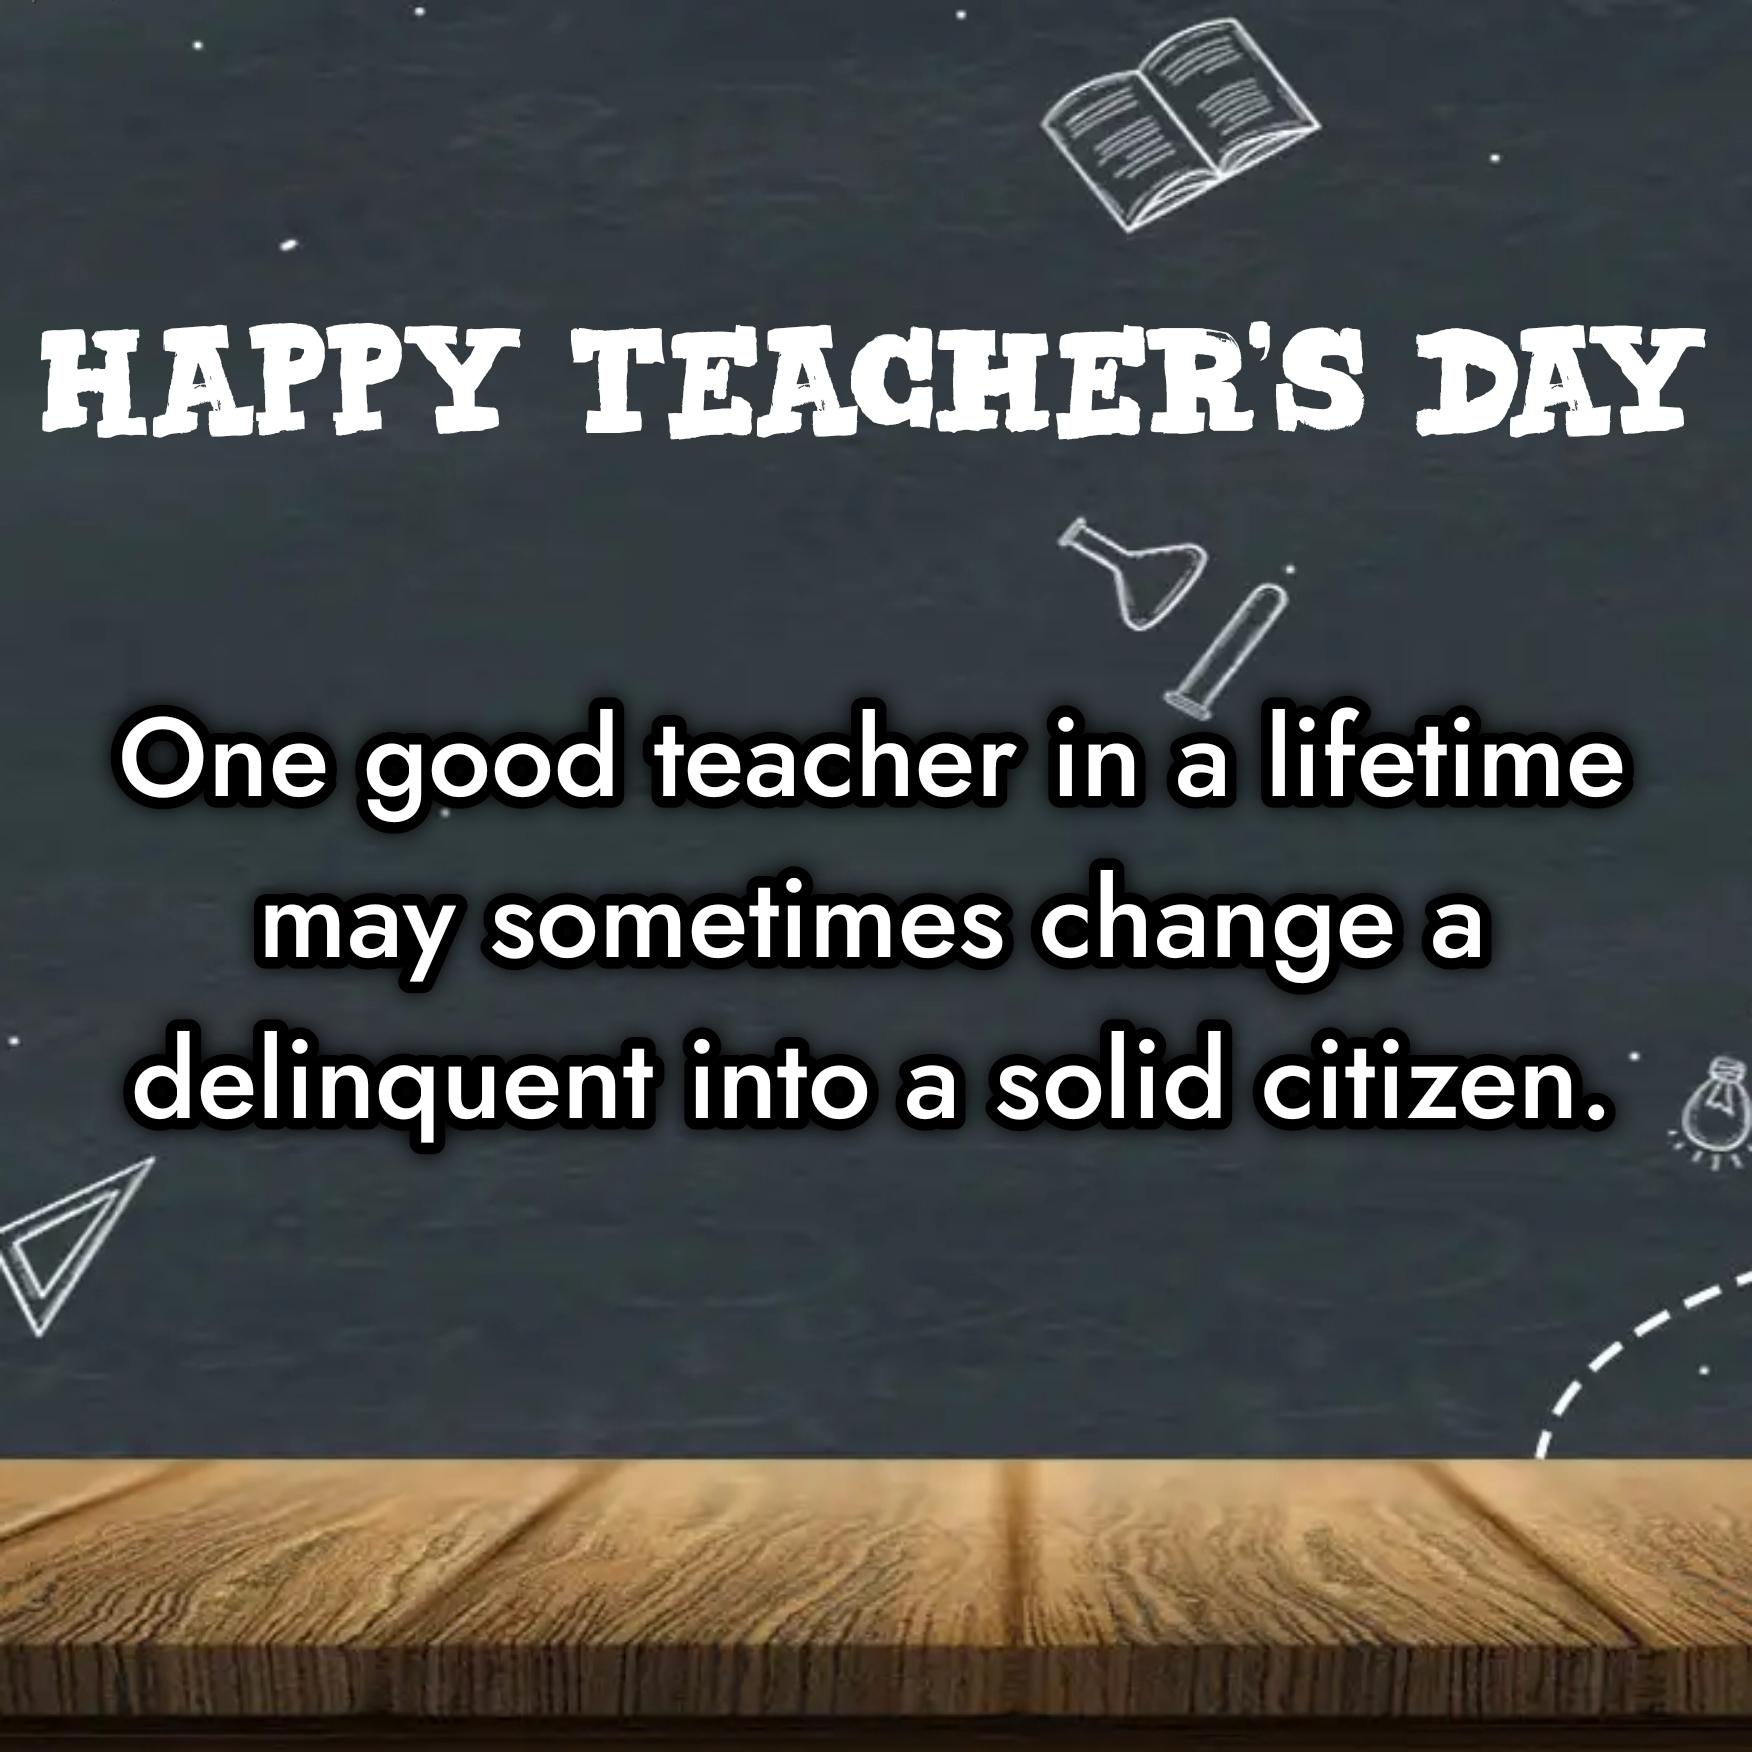 One good teacher in a lifetime may sometimes change